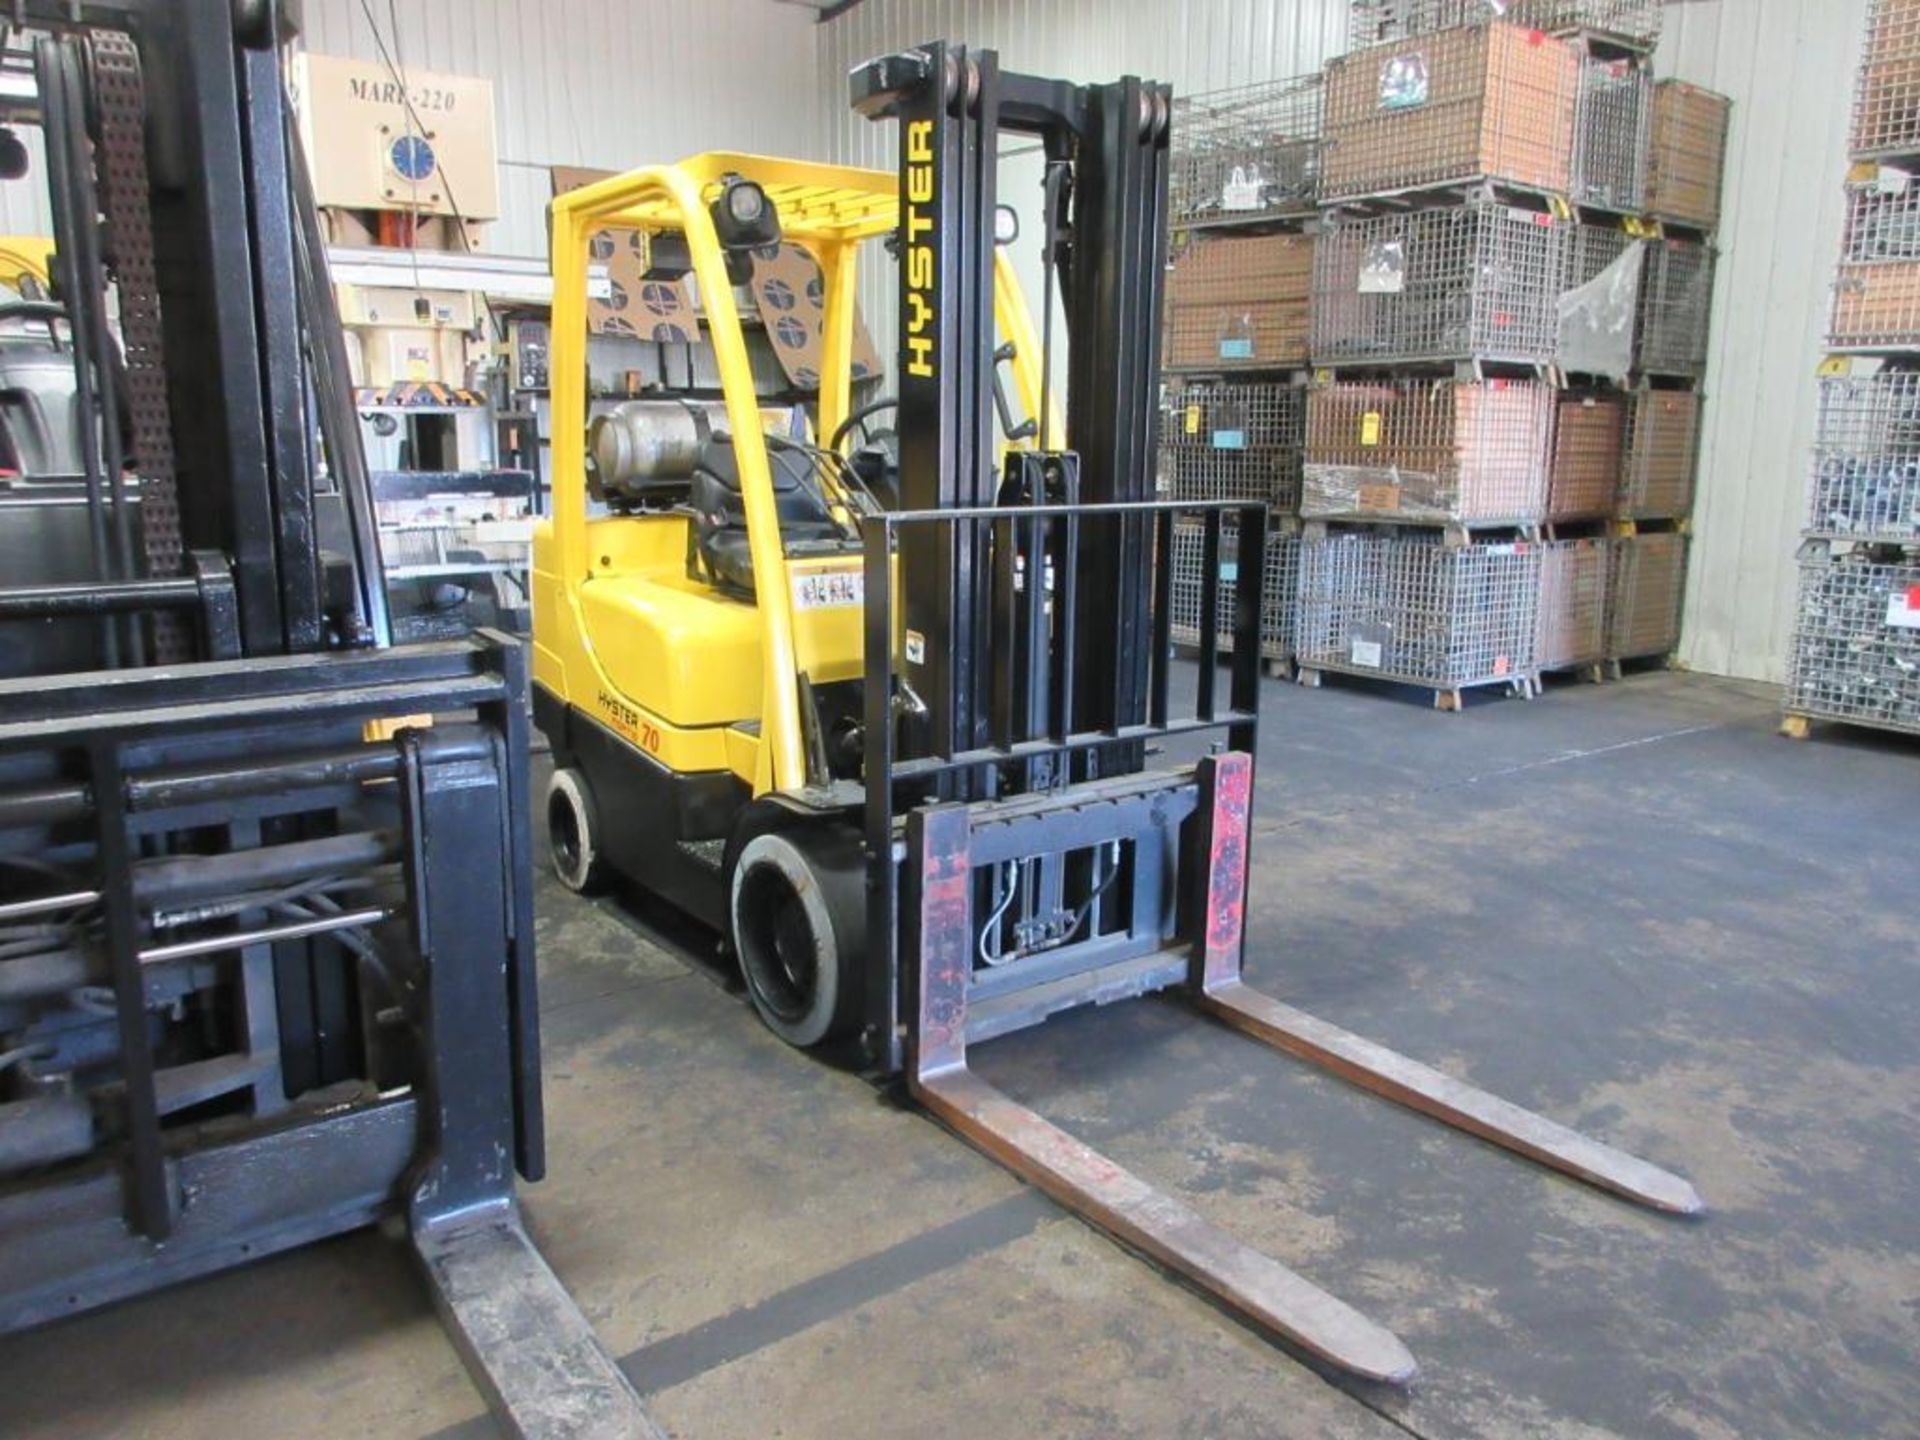 2009 HYSTER 7,000-LB. CAP. LPG FORKLIFT, 3-STAGE MAST, 187 IN. MAX. LOAD HT., CUSHION TIRES, LEVER - Image 2 of 6